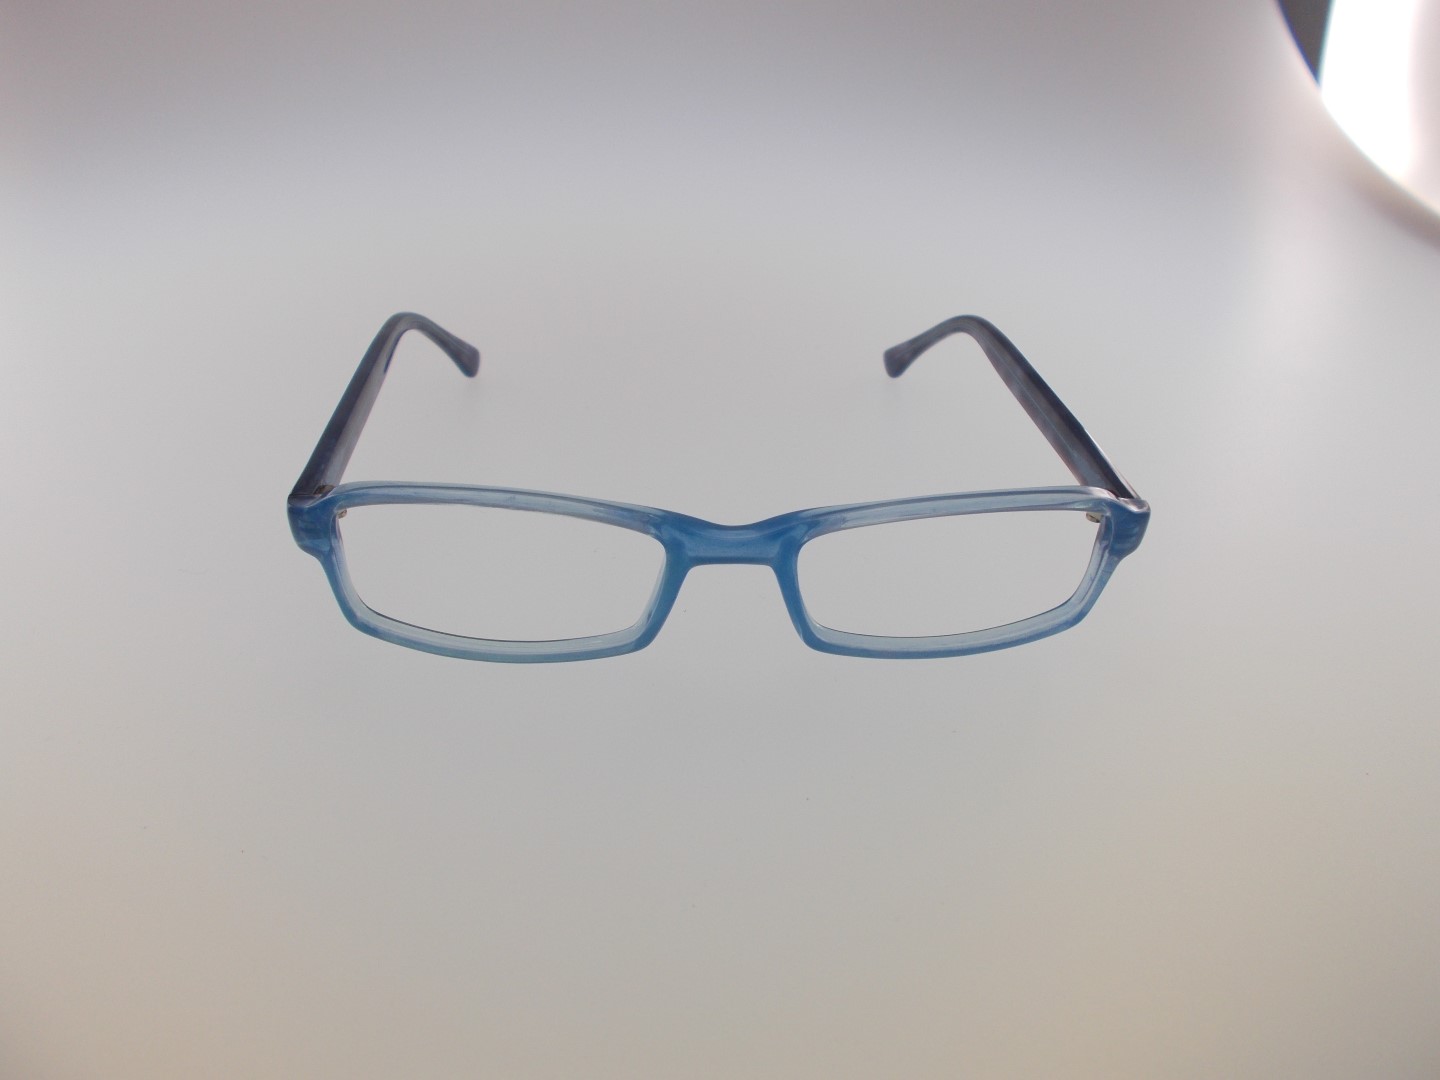 Image of spectacles